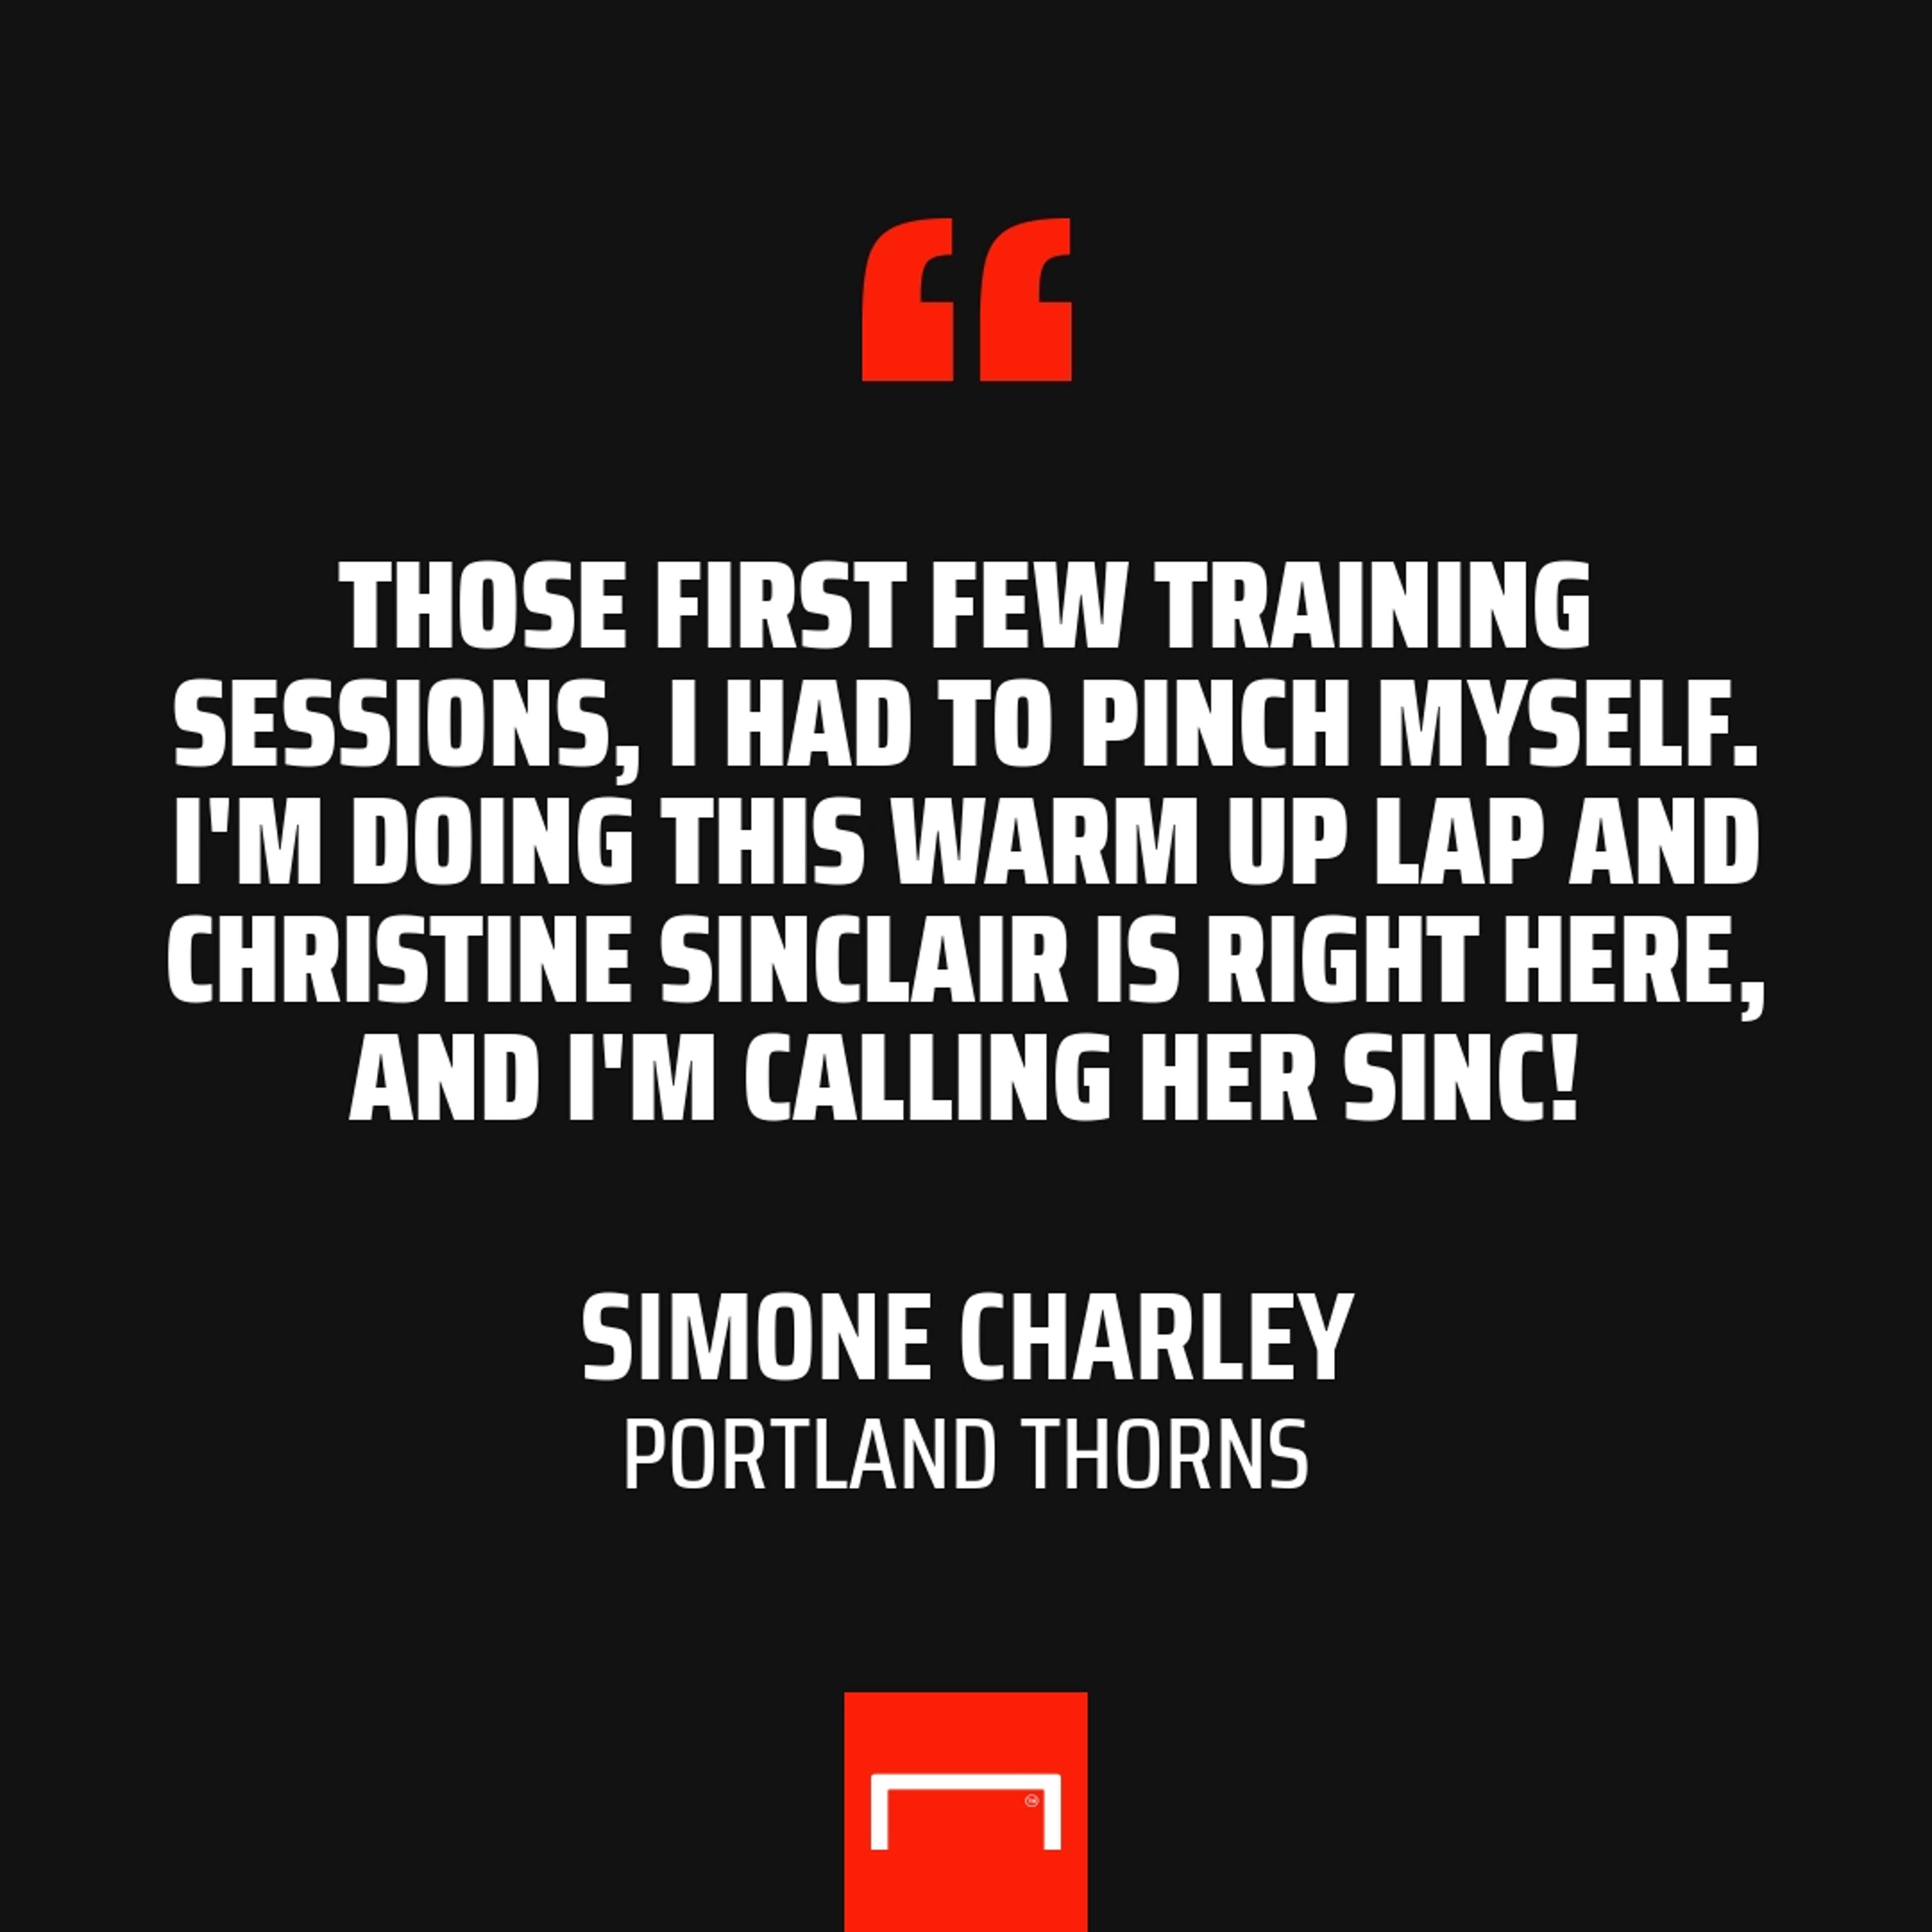 Simone Charley quote PS 1:1